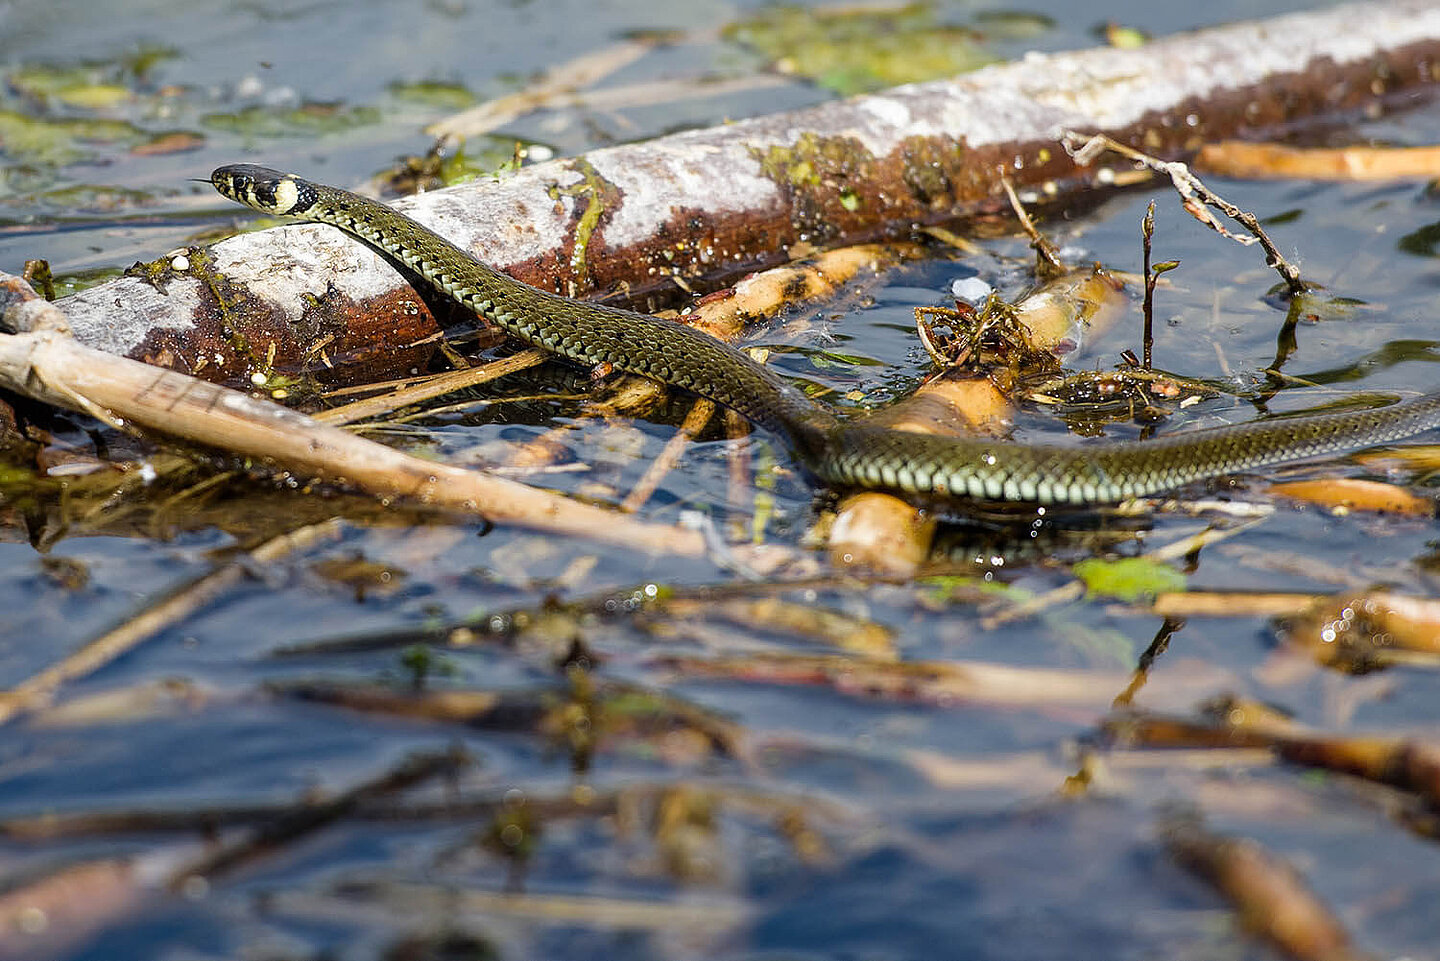 a grass snake slithers over wood floating in the water